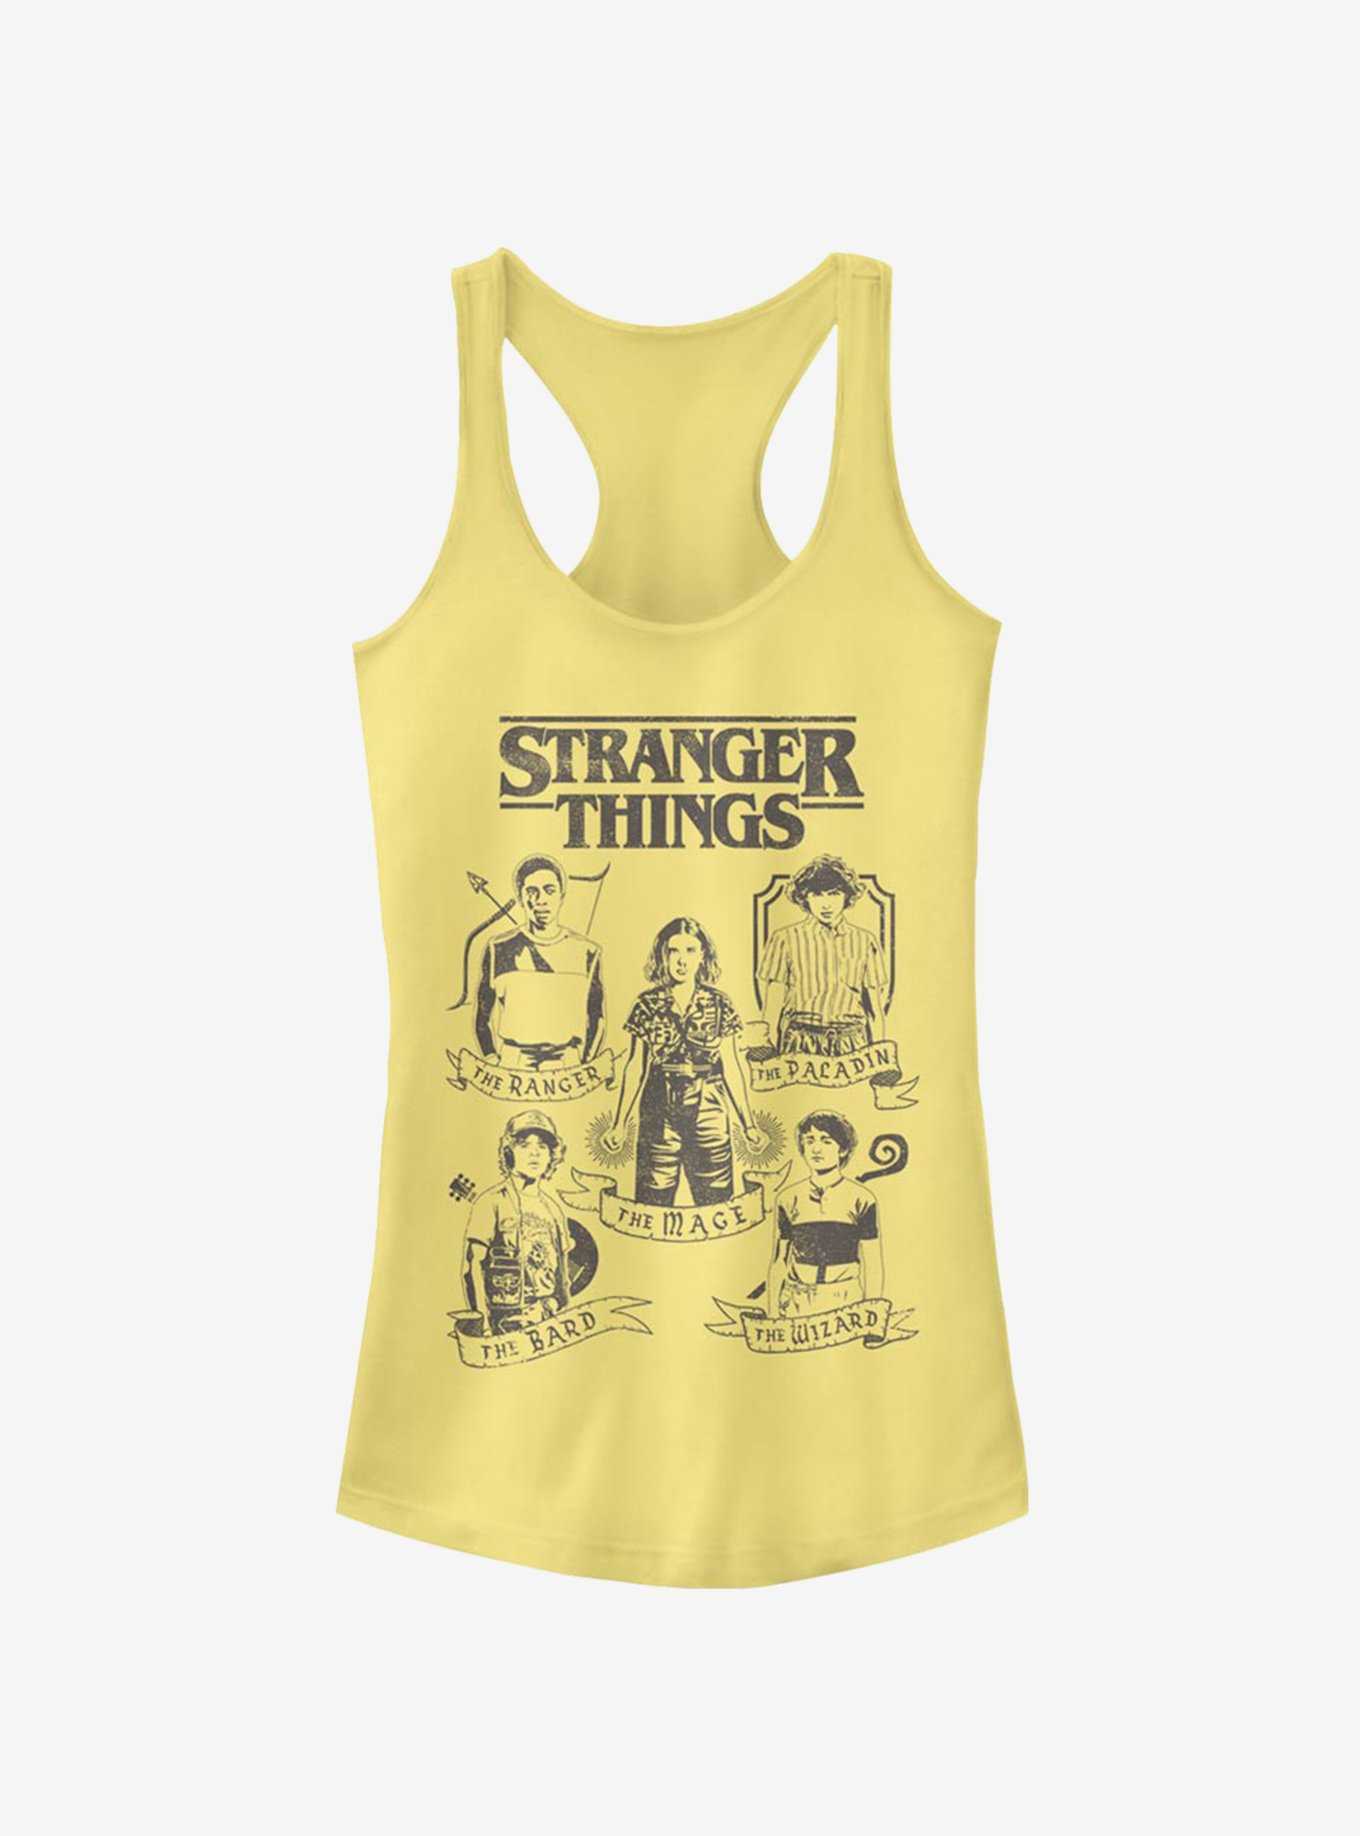 Stranger Things Dungeons and Dragons Classes Girls Tank Top, , hi-res